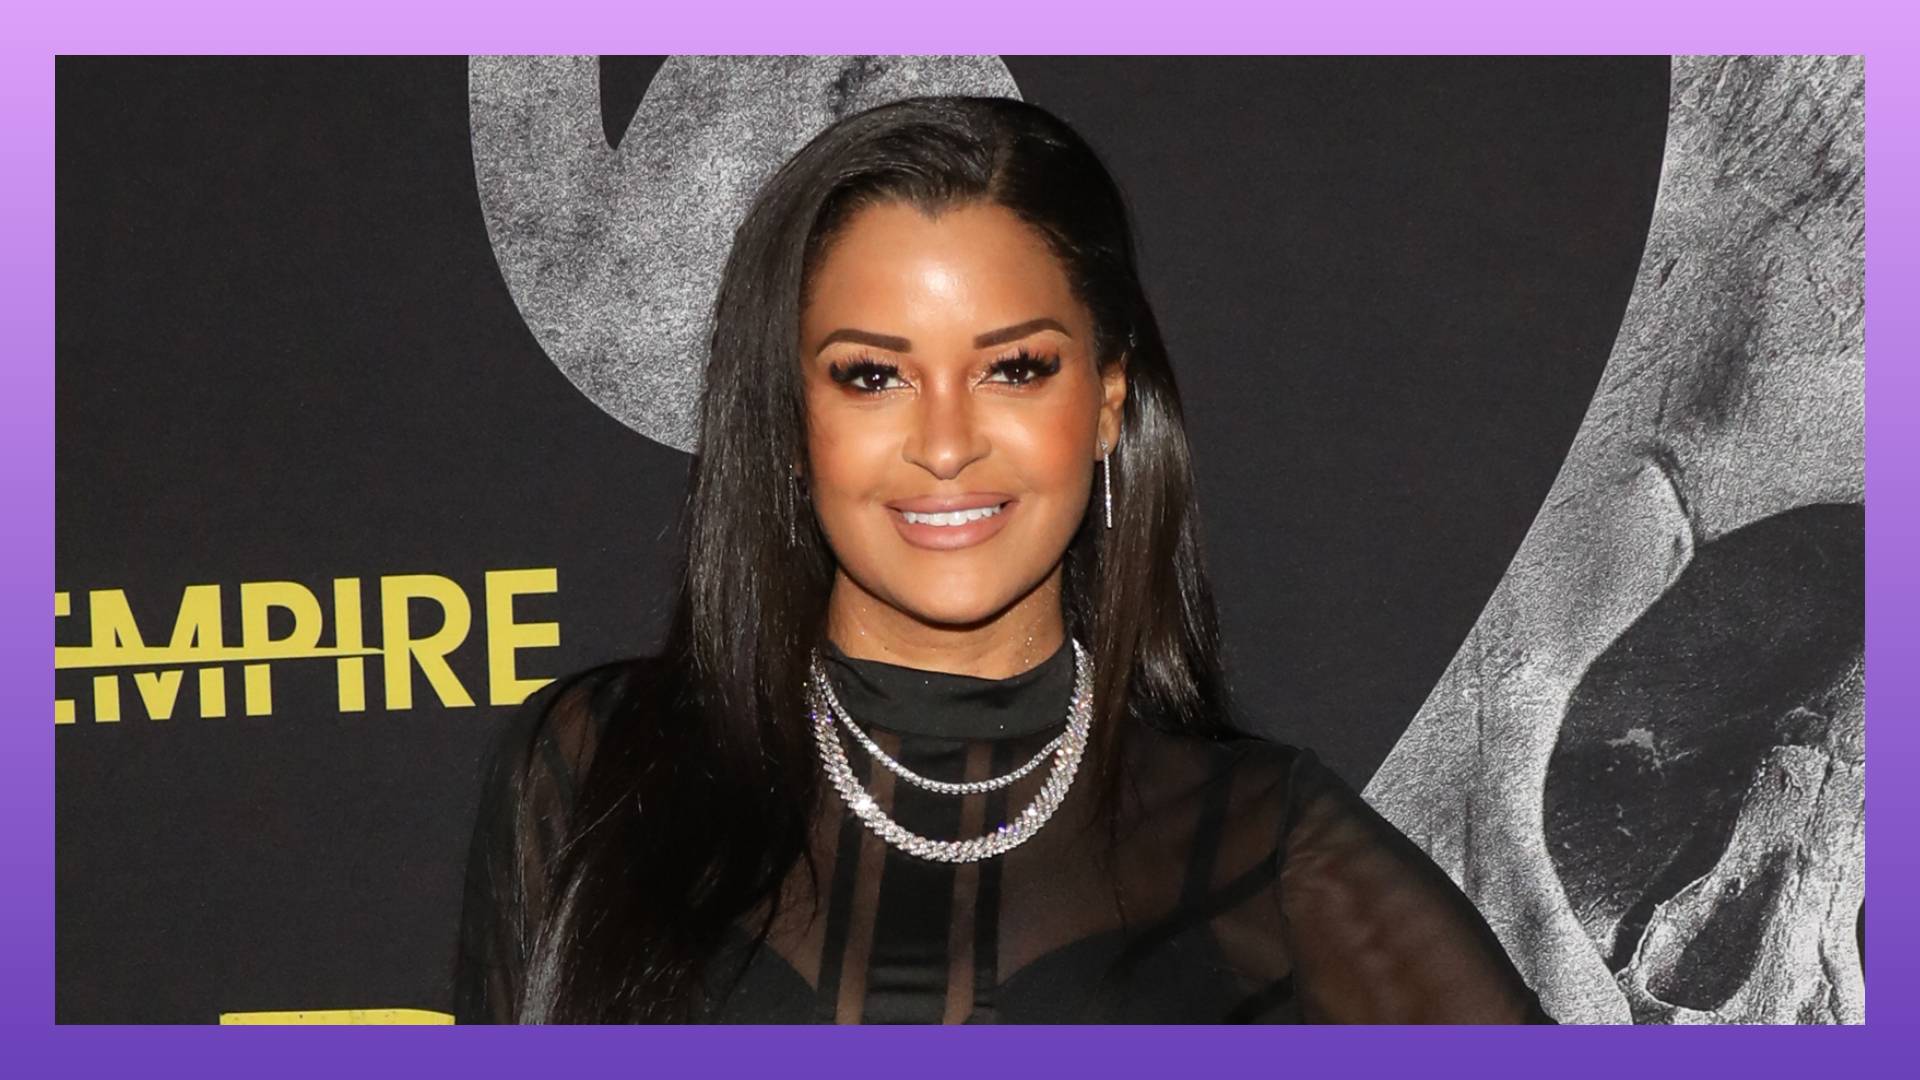 Claudia Jordan Opens Up About Her Recent Cosmetic Foot Surgery: ‘It’s Going To Help My Confidence’ [EXCLUSIVE]
